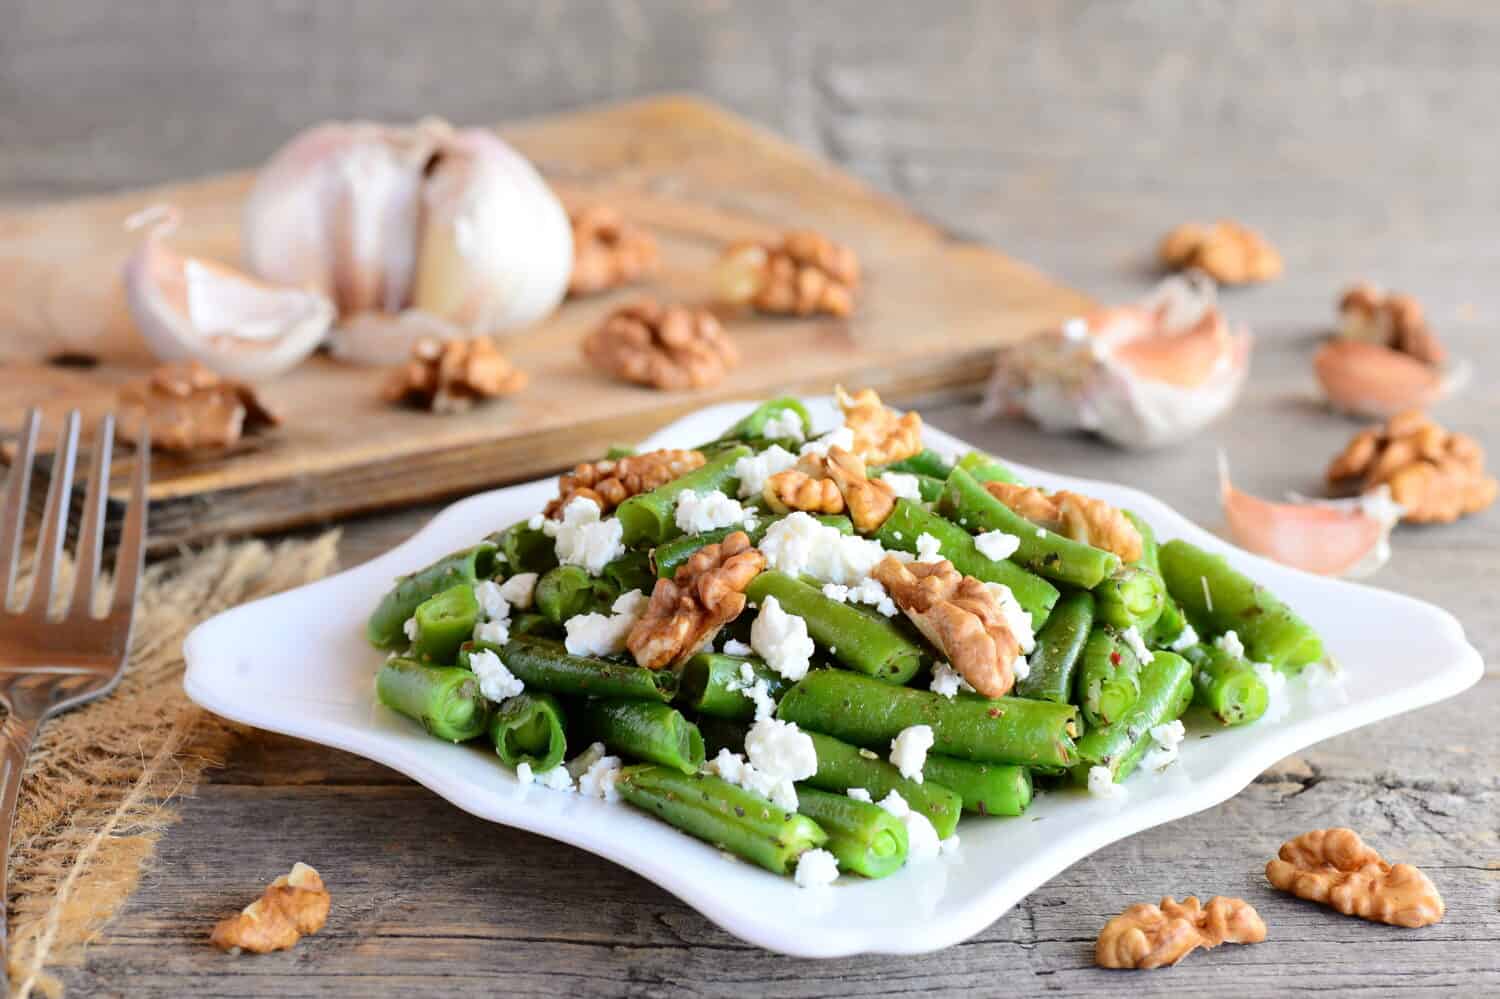 Warm green bean salad with cottage cheese and peeled walnuts. Diet green beans recipe. Vegetarian main dish. Rustic style